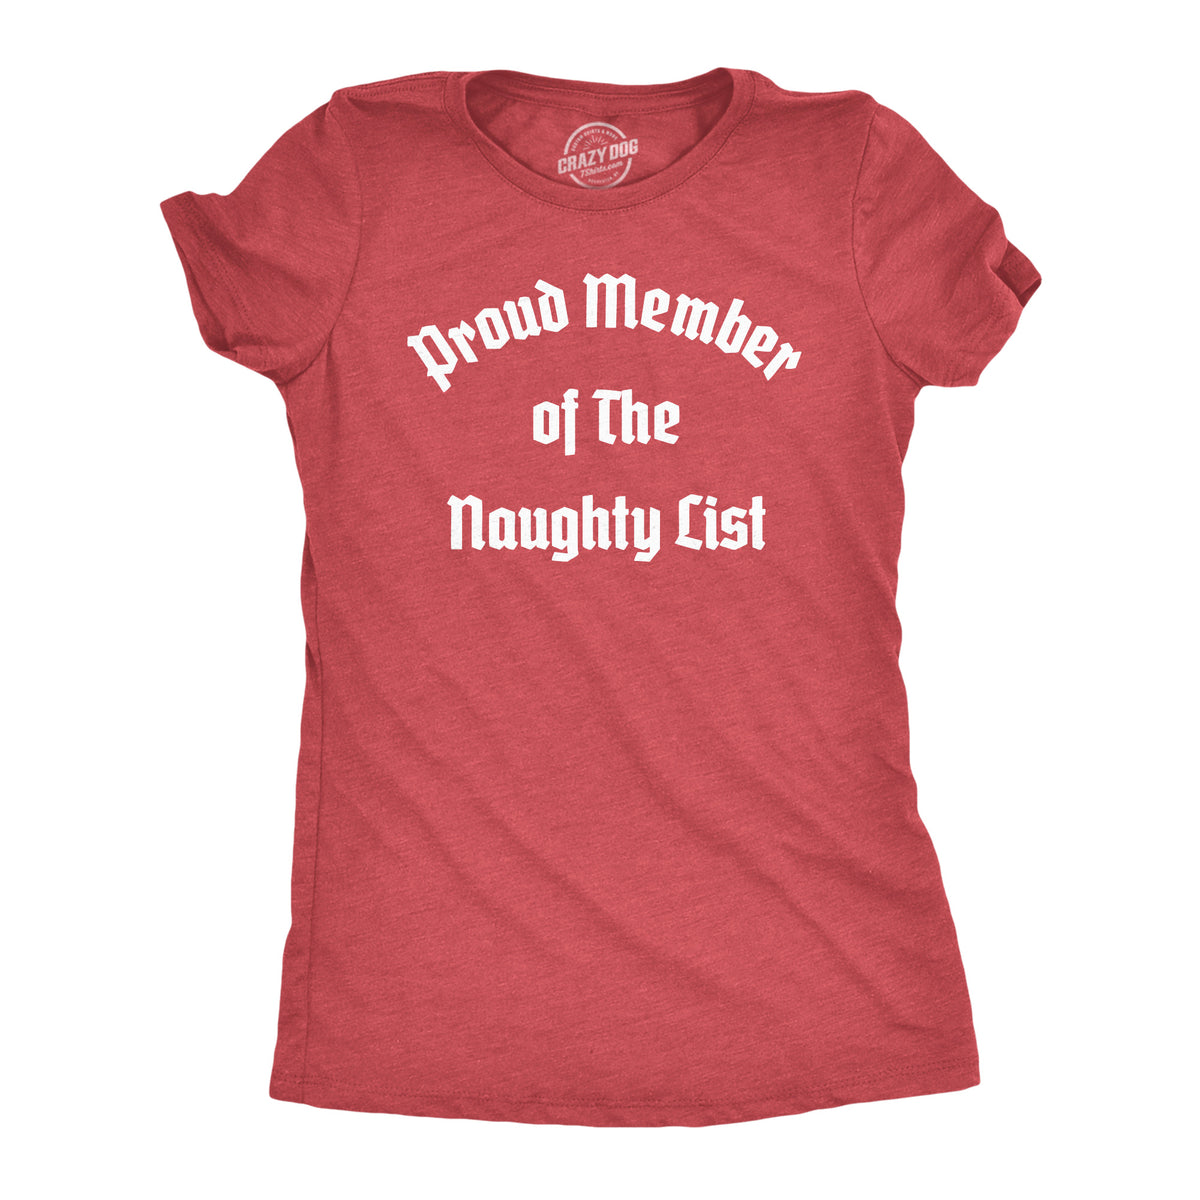 Funny Heather Red - PROUD Proud Member Of The Naughty List Womens T Shirt Nerdy Christmas sarcastic Tee